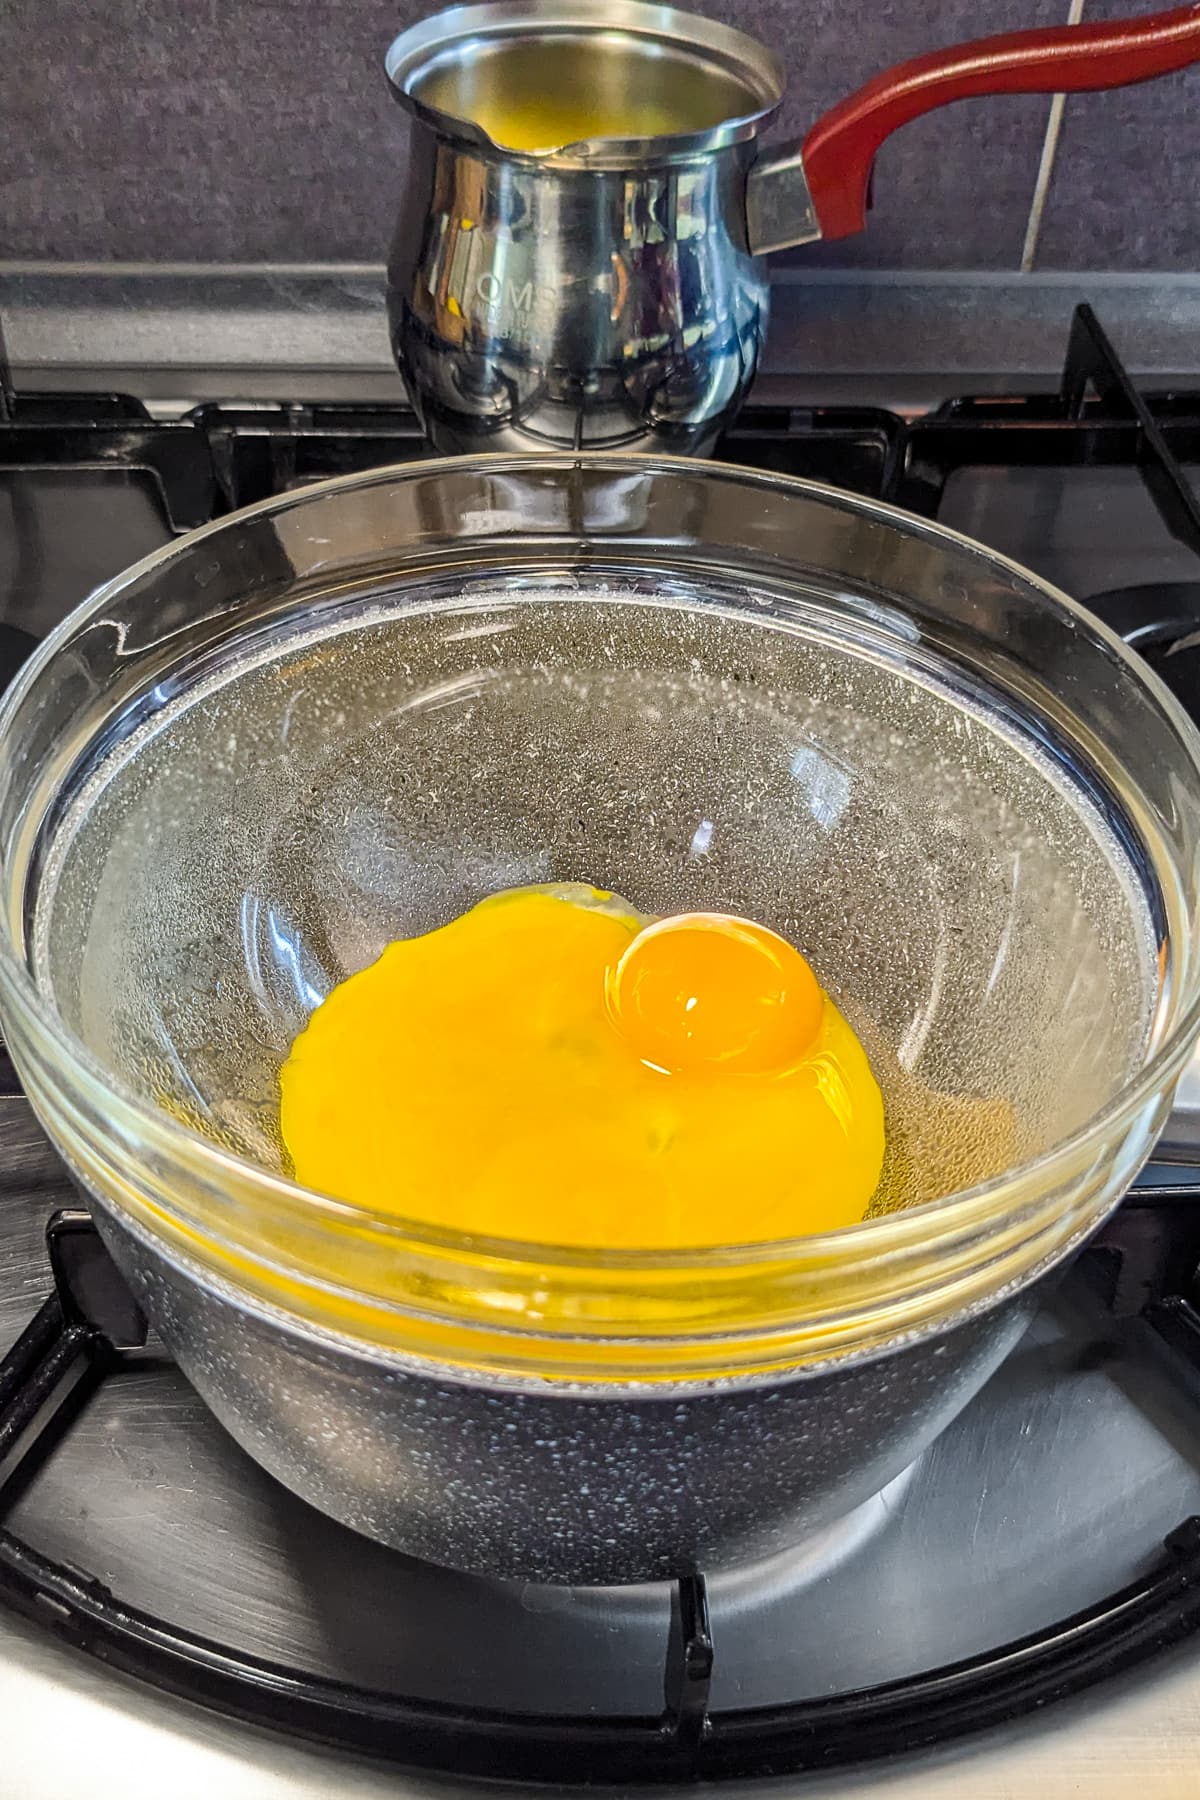 Two eggs with lemon juice cooked using "Bain marie" tehnique.